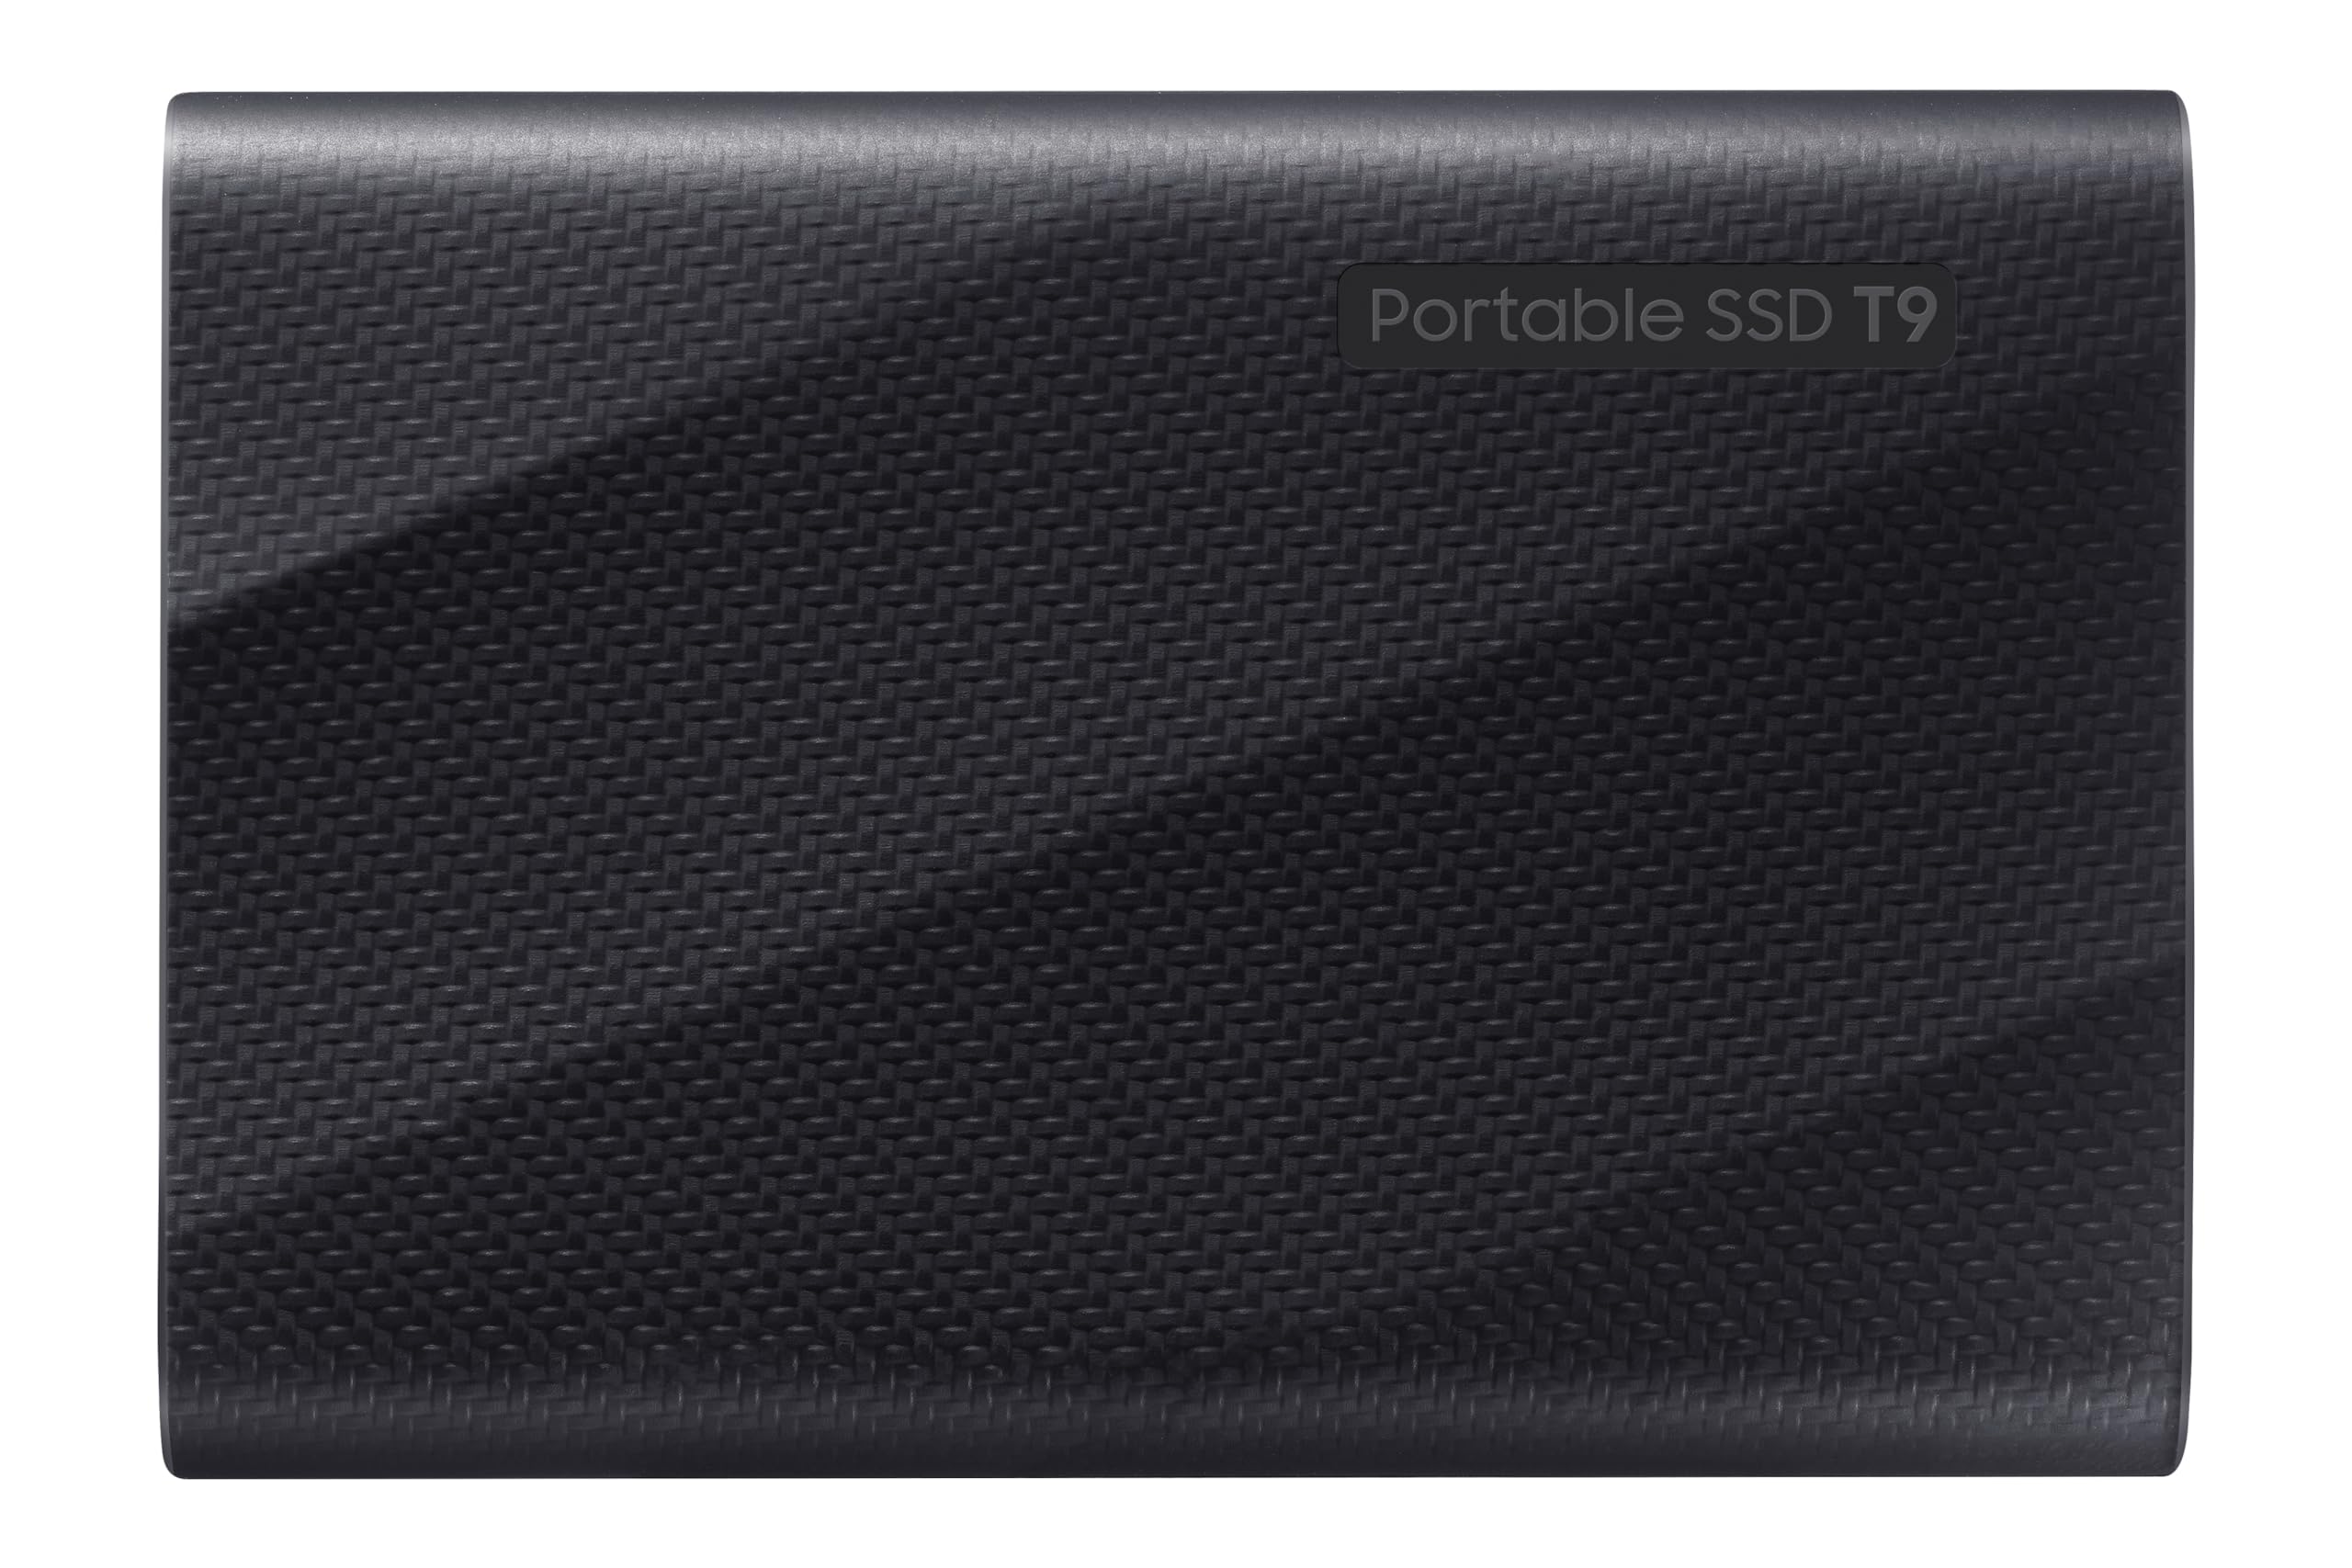 SAMSUNG T9 Portable SSD 4TB, USB 3.2 Gen 2x2 External Solid State Drive, Seq. Read Speeds Up to 2,000MB/s for Gaming, Students and Professionals,MU-PG4T0B/AM, Black